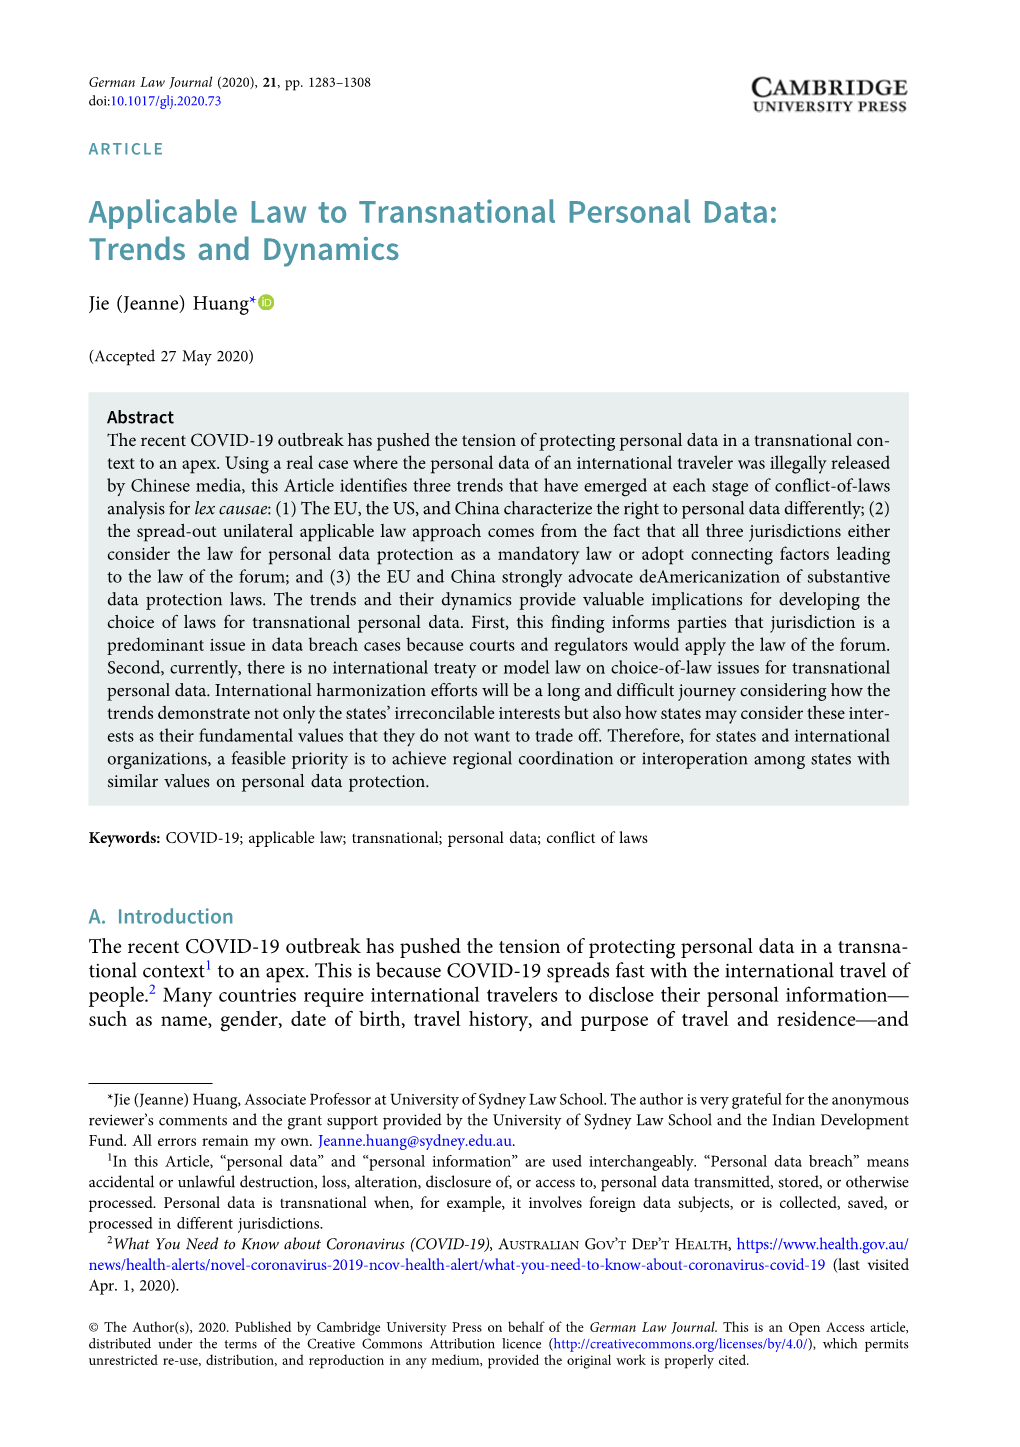 Applicable Law to Transnational Personal Data: Trends and Dynamics